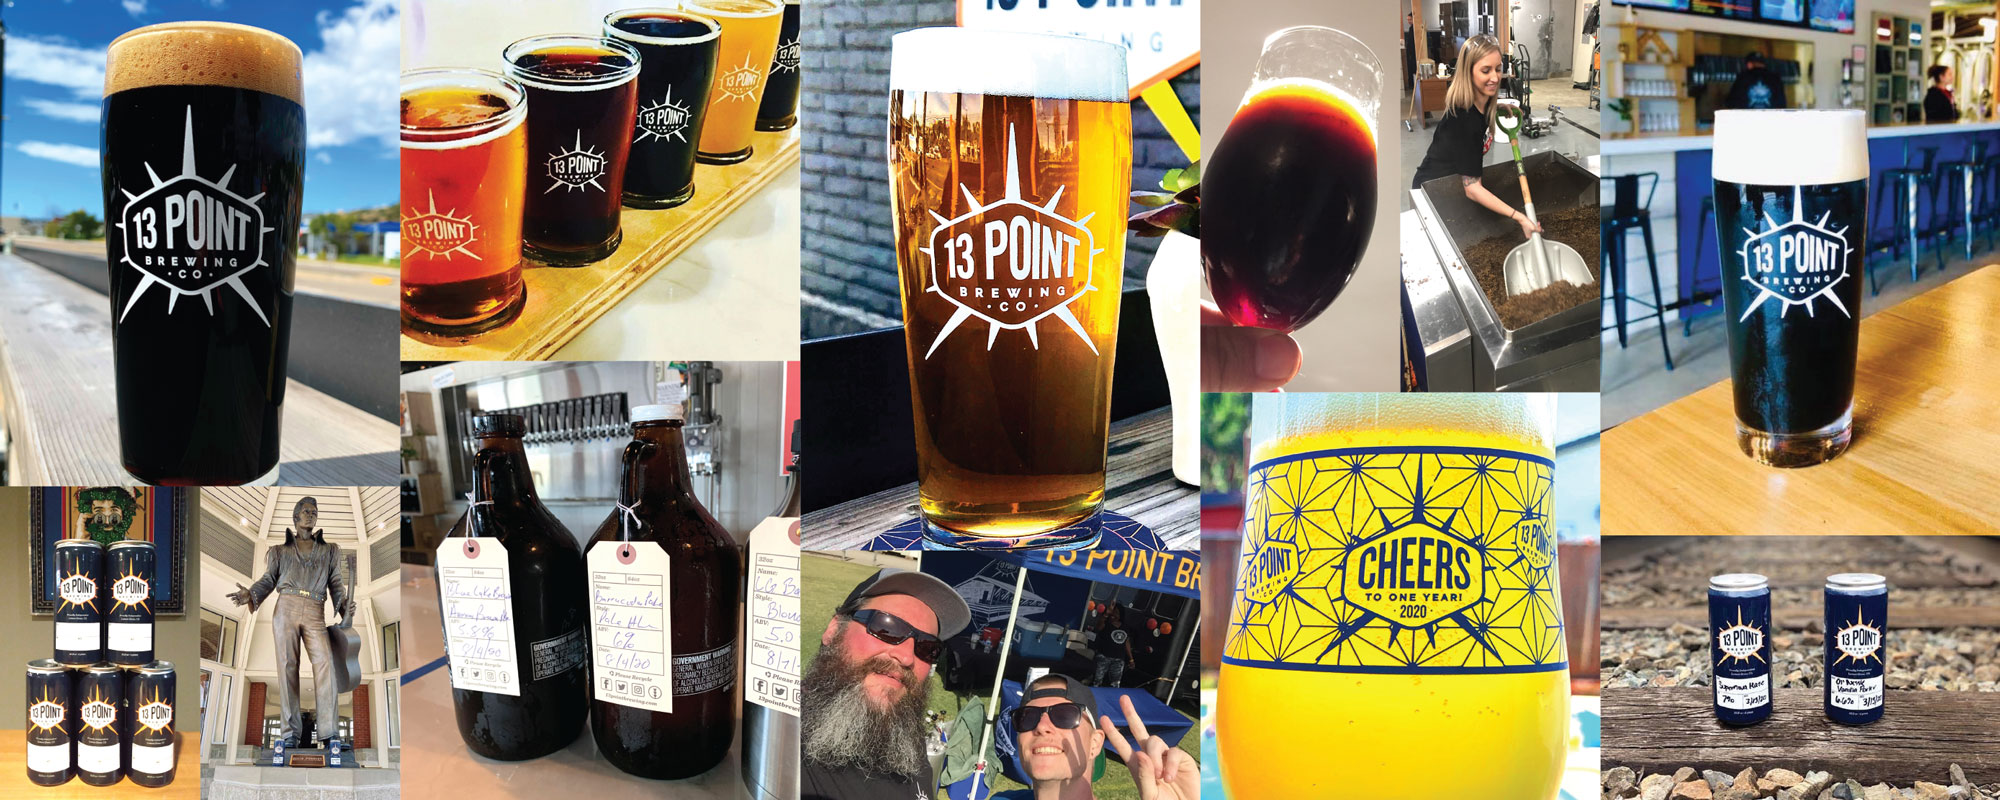 13 Points Brewery, Beers, and Events Collage